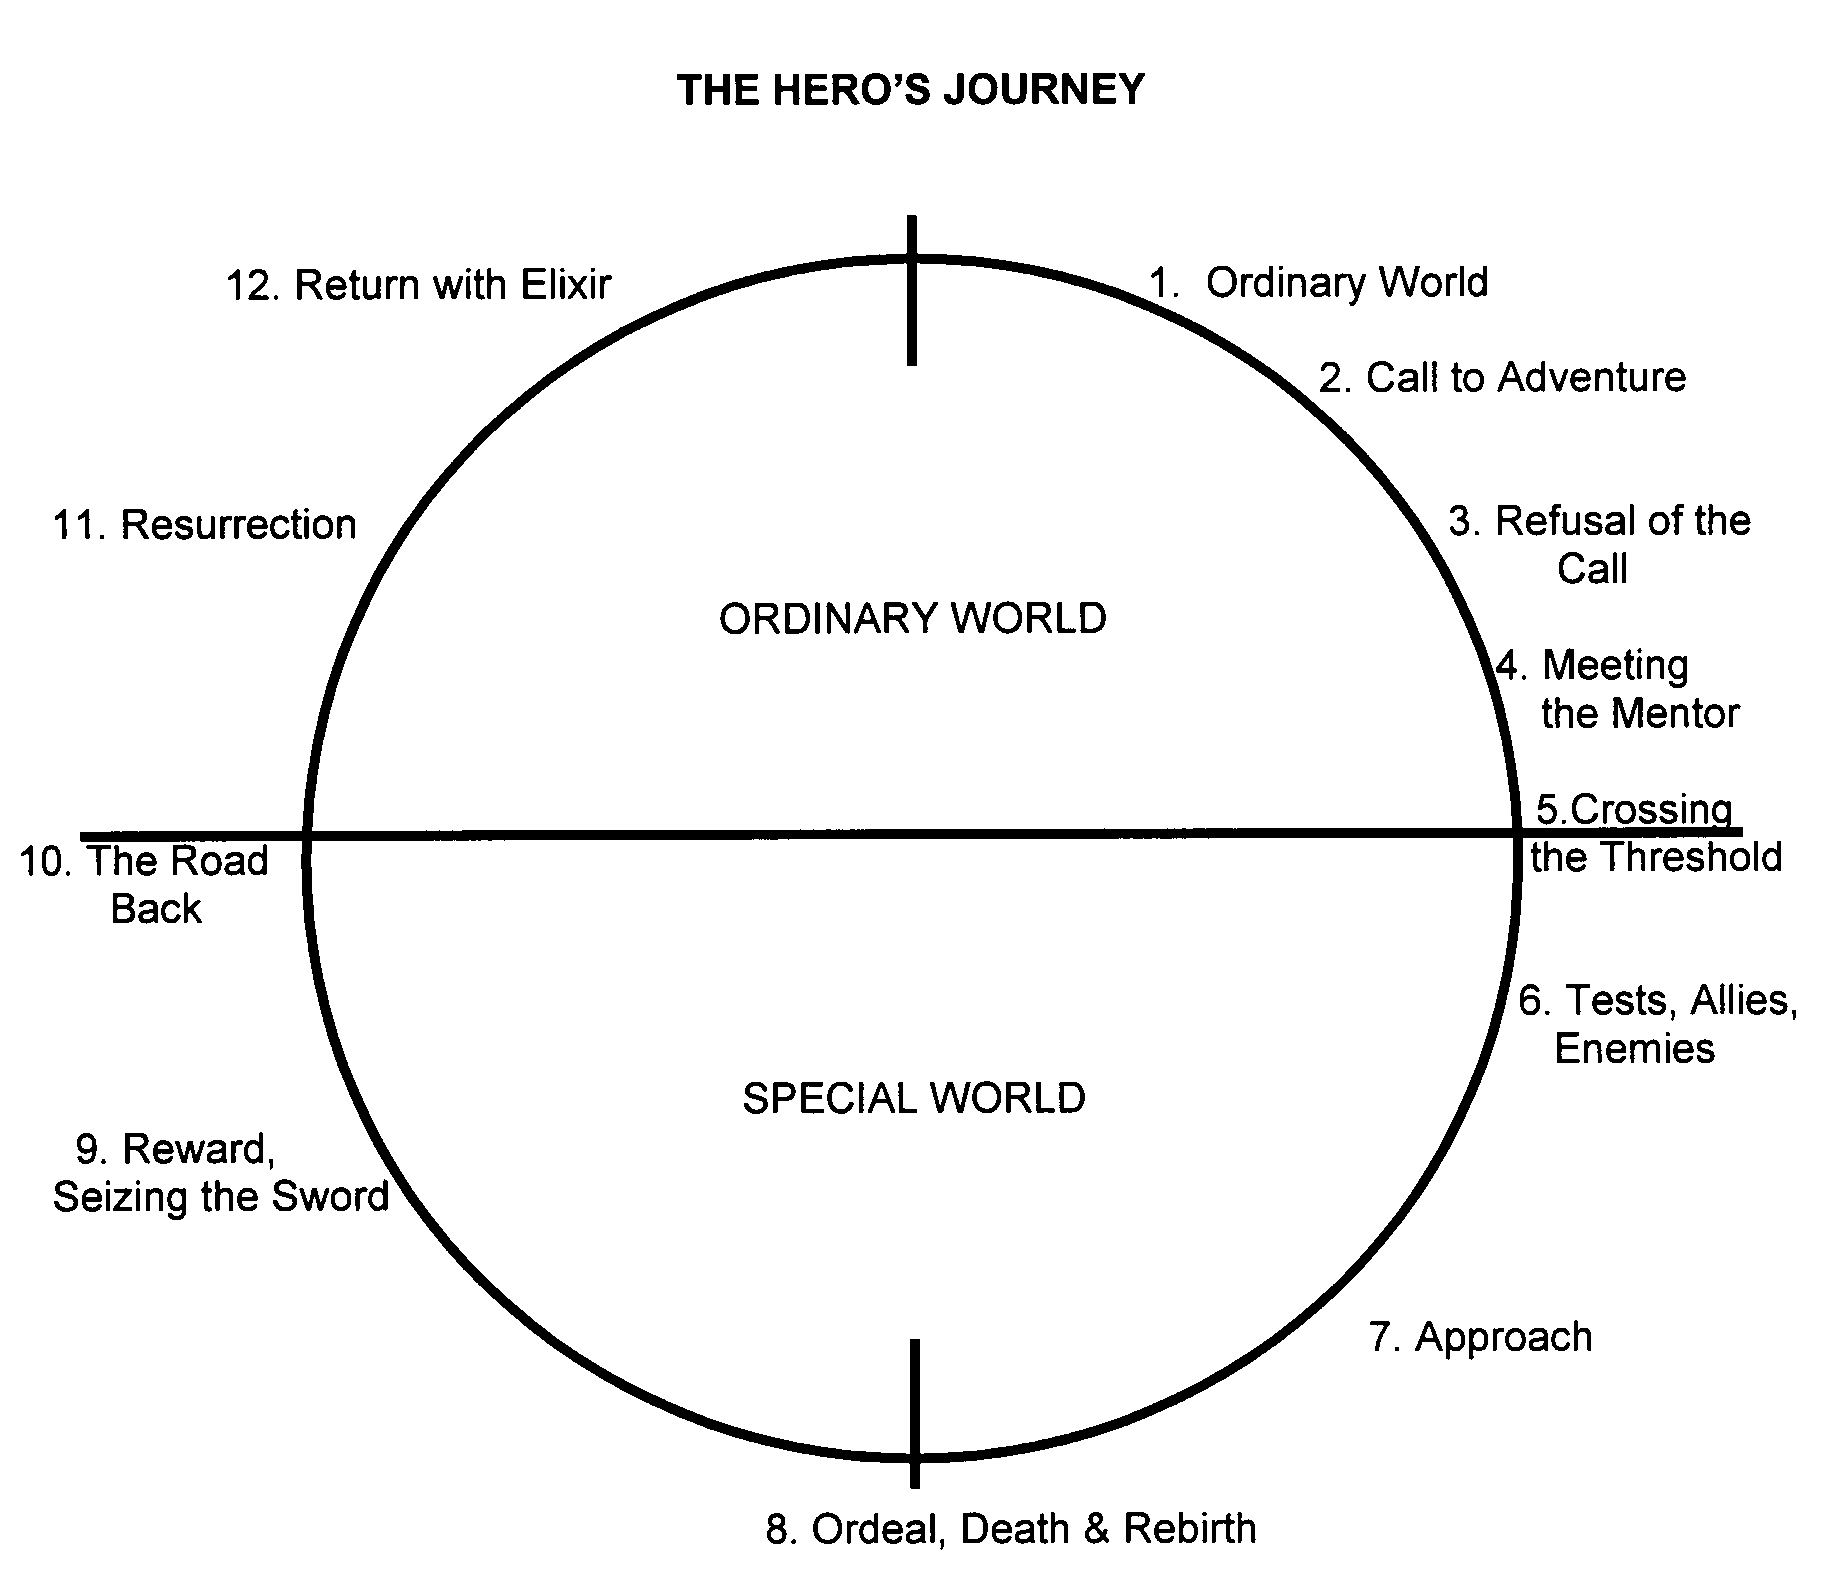 The Hero’s Journey of Finding Your Calling